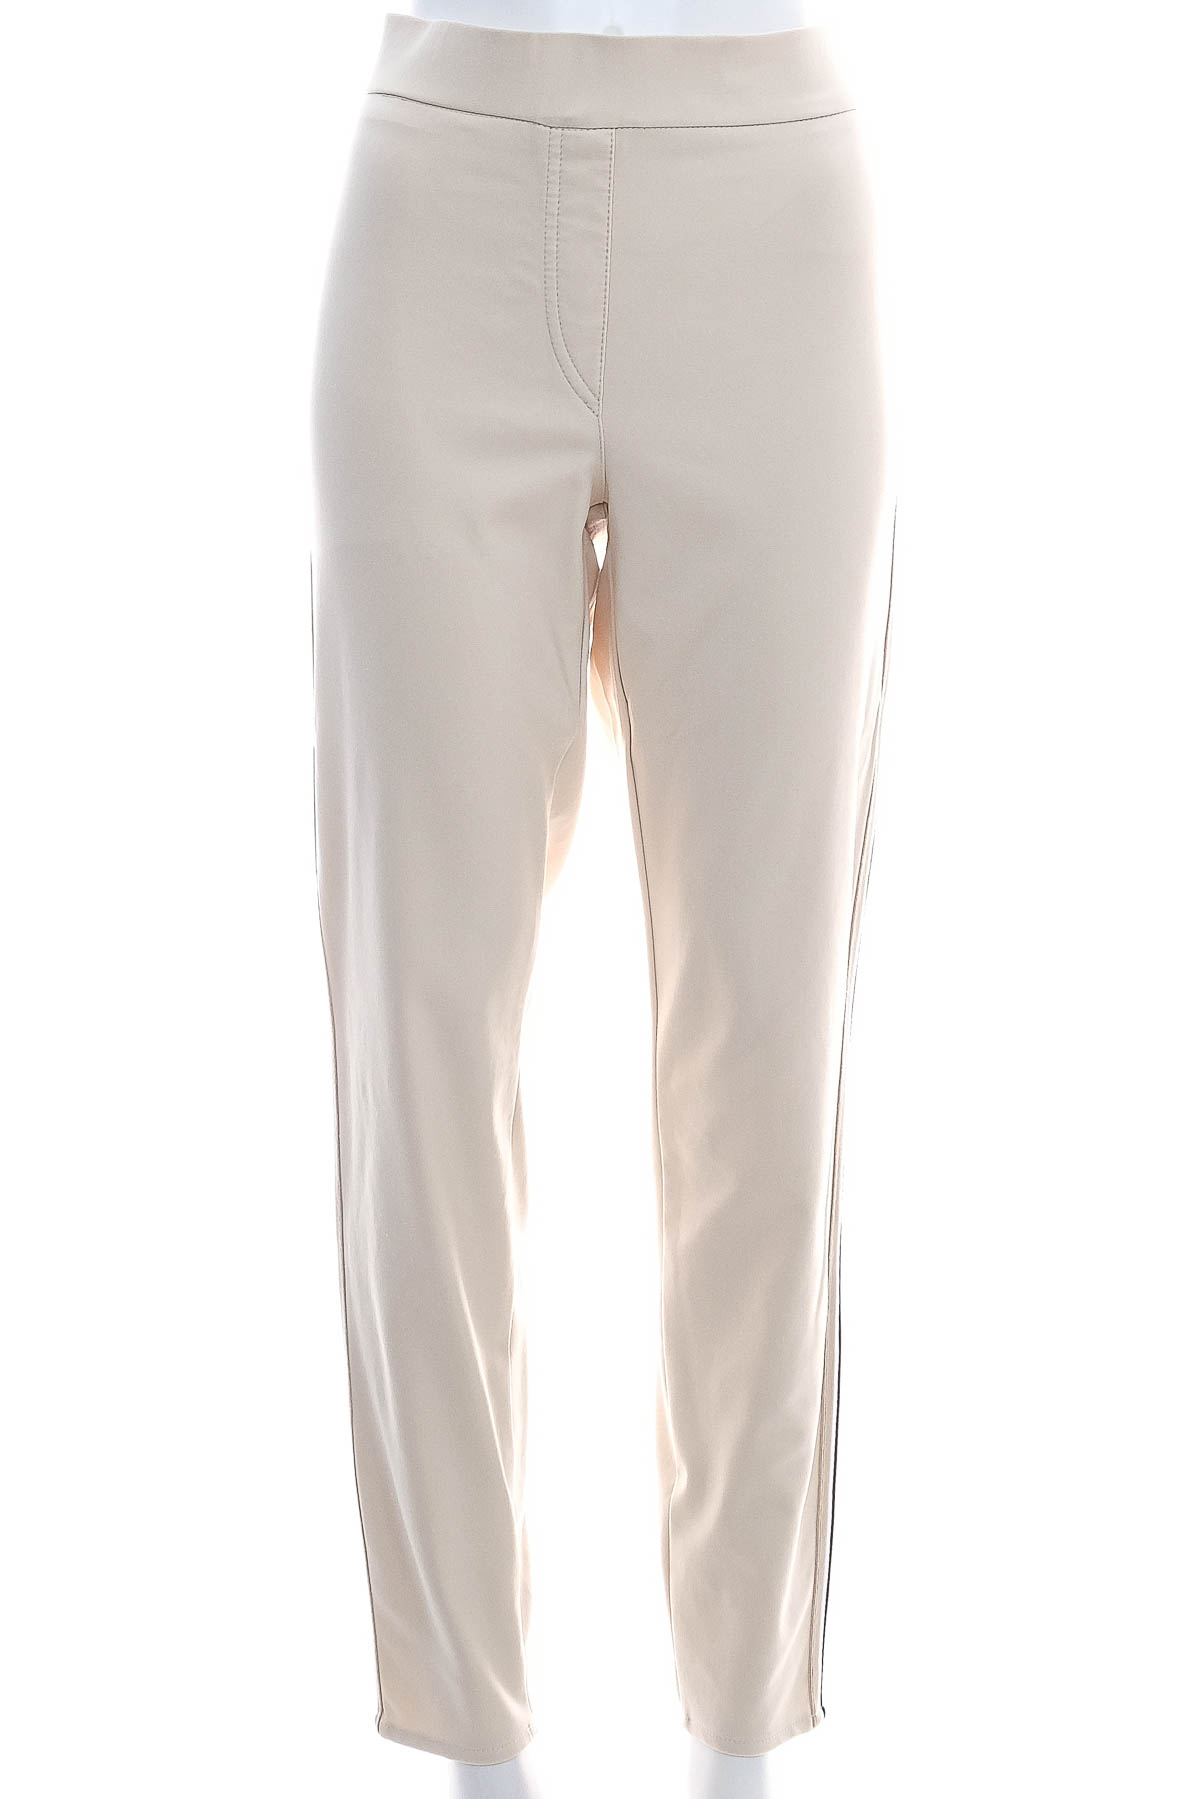 Women's trousers - THOM BY THOMAS RATH - 0